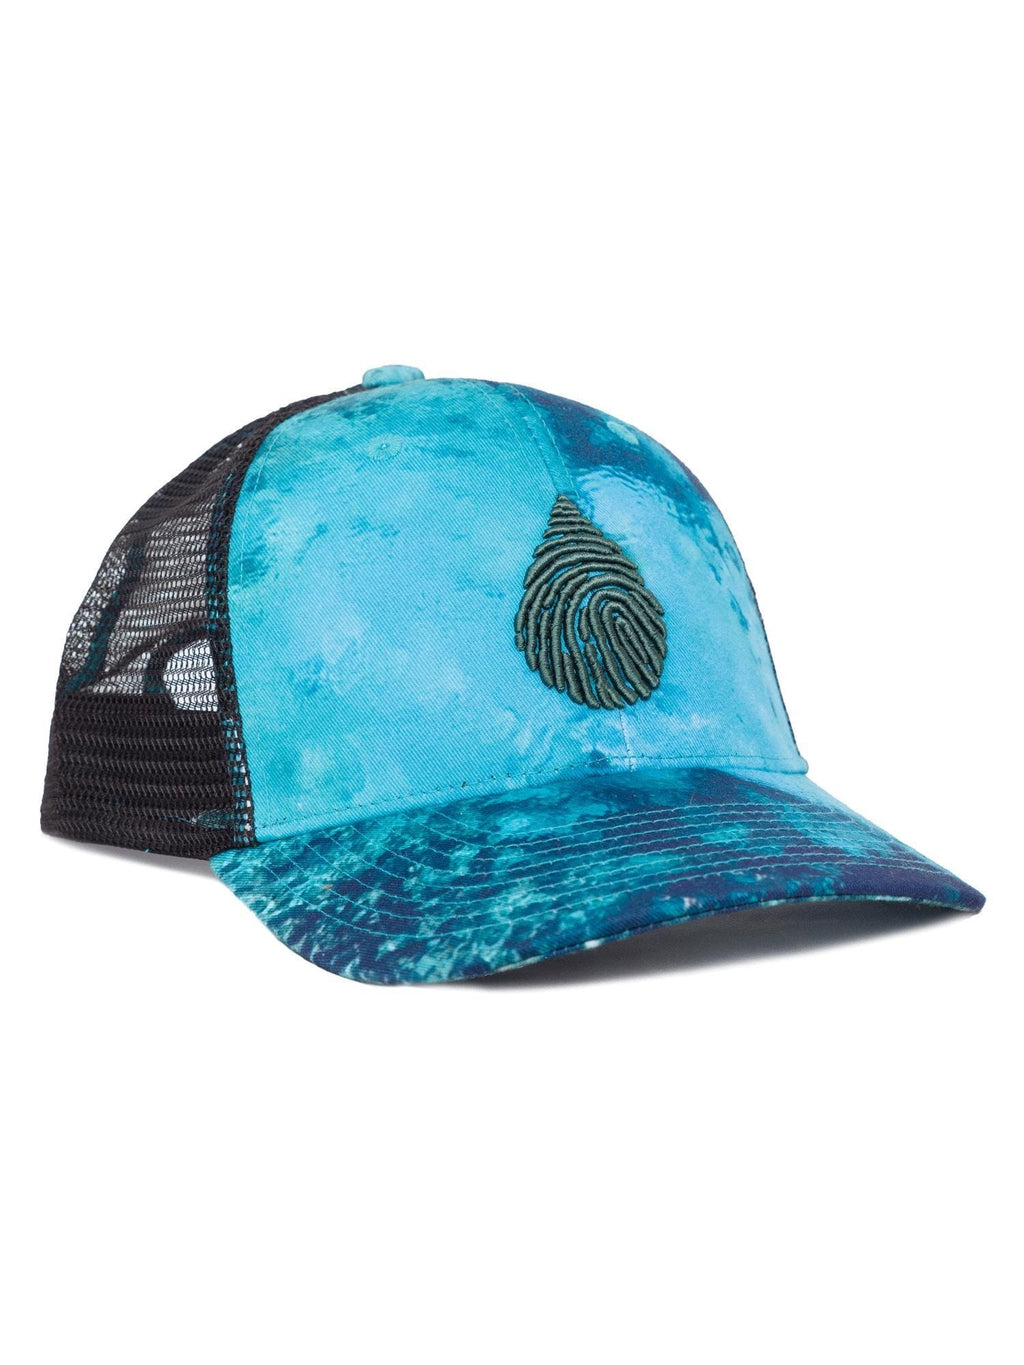 blue florida springs printed hat with a forest green waterlust embroidered logo